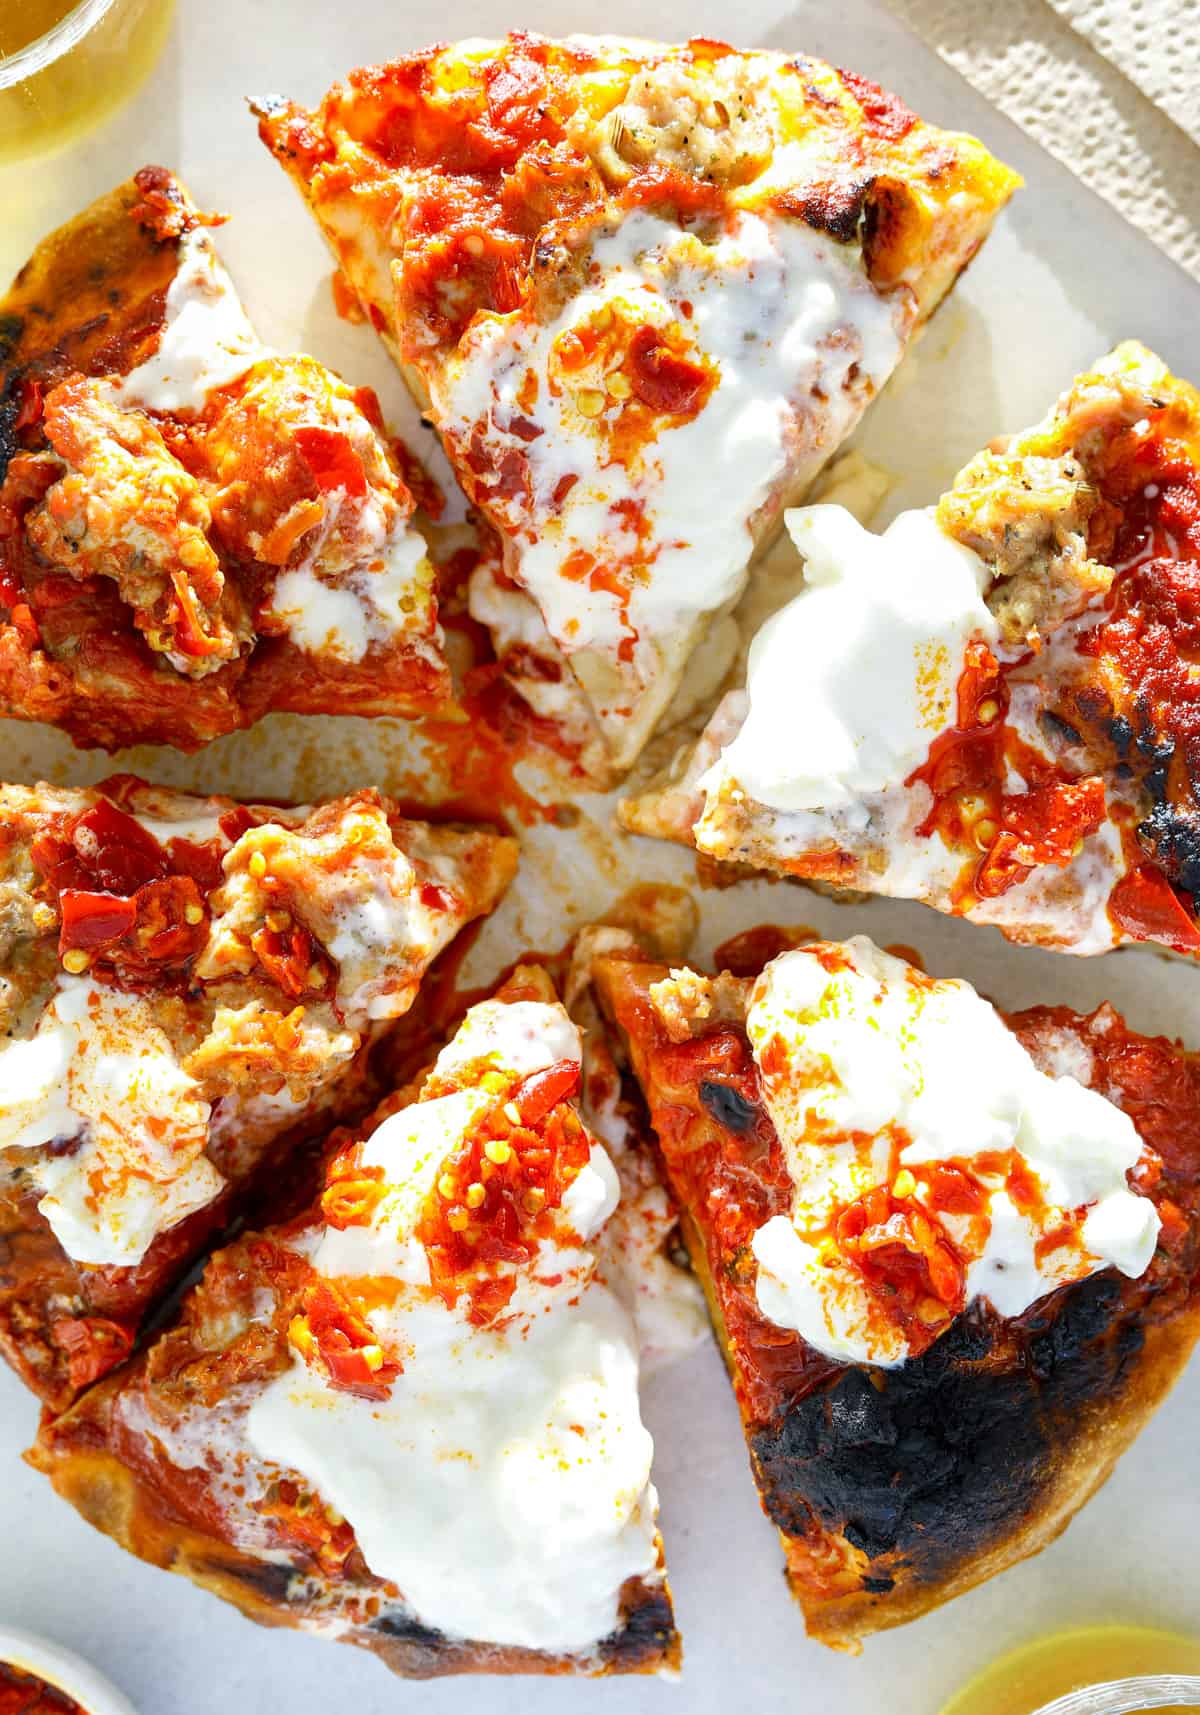 a pizza cut into 6 slices topped with burrata cheese and hot chilis